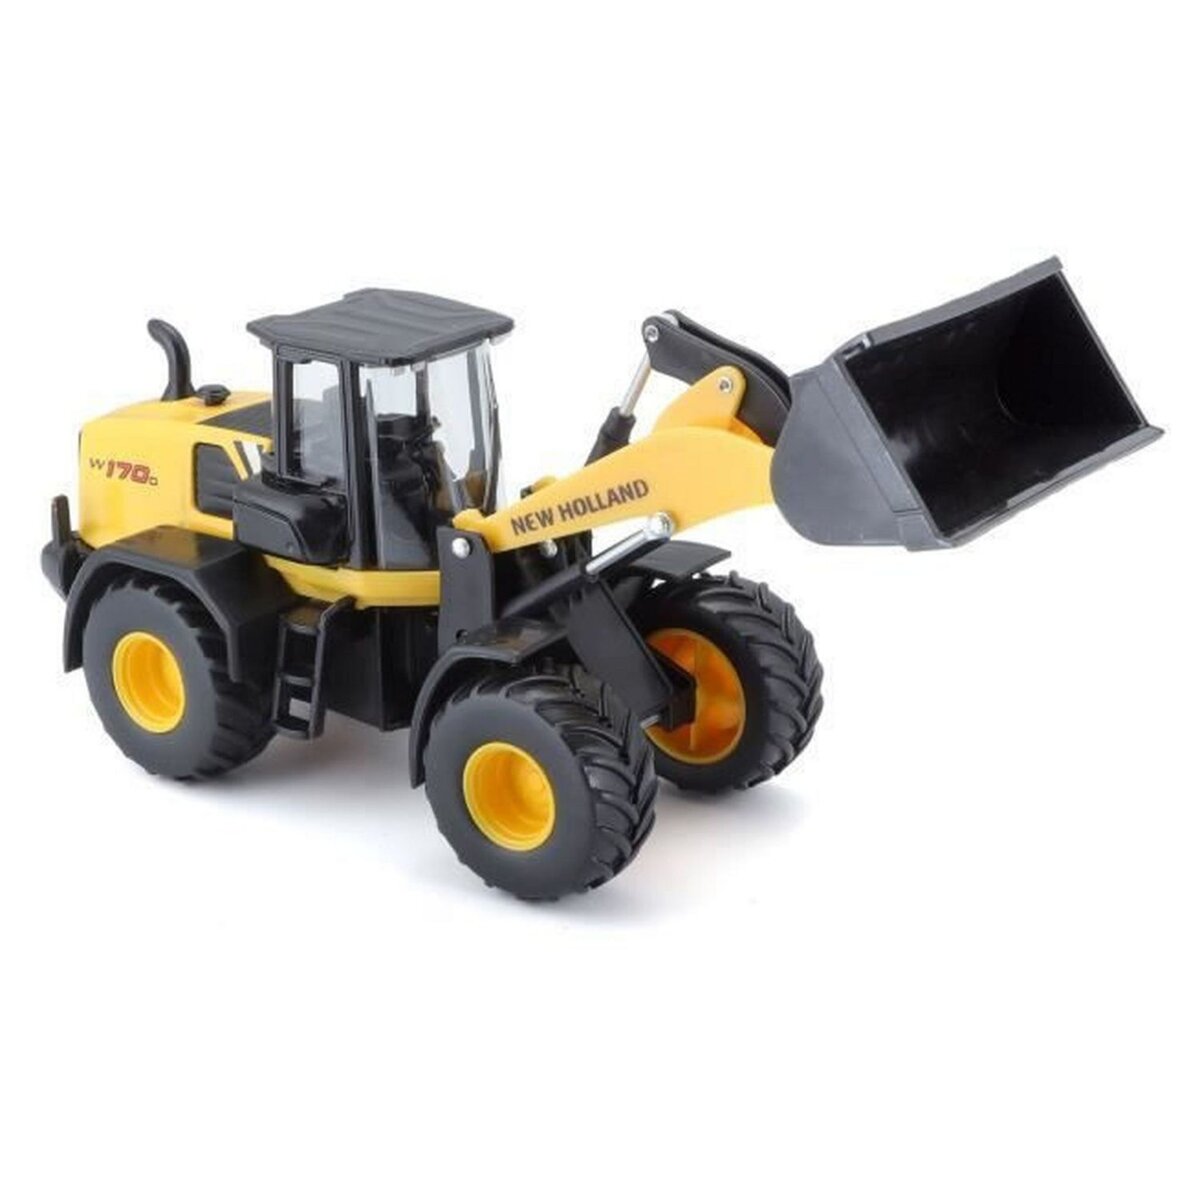 BURAGO Chargeur W170D NEW HOLLAND 1/50